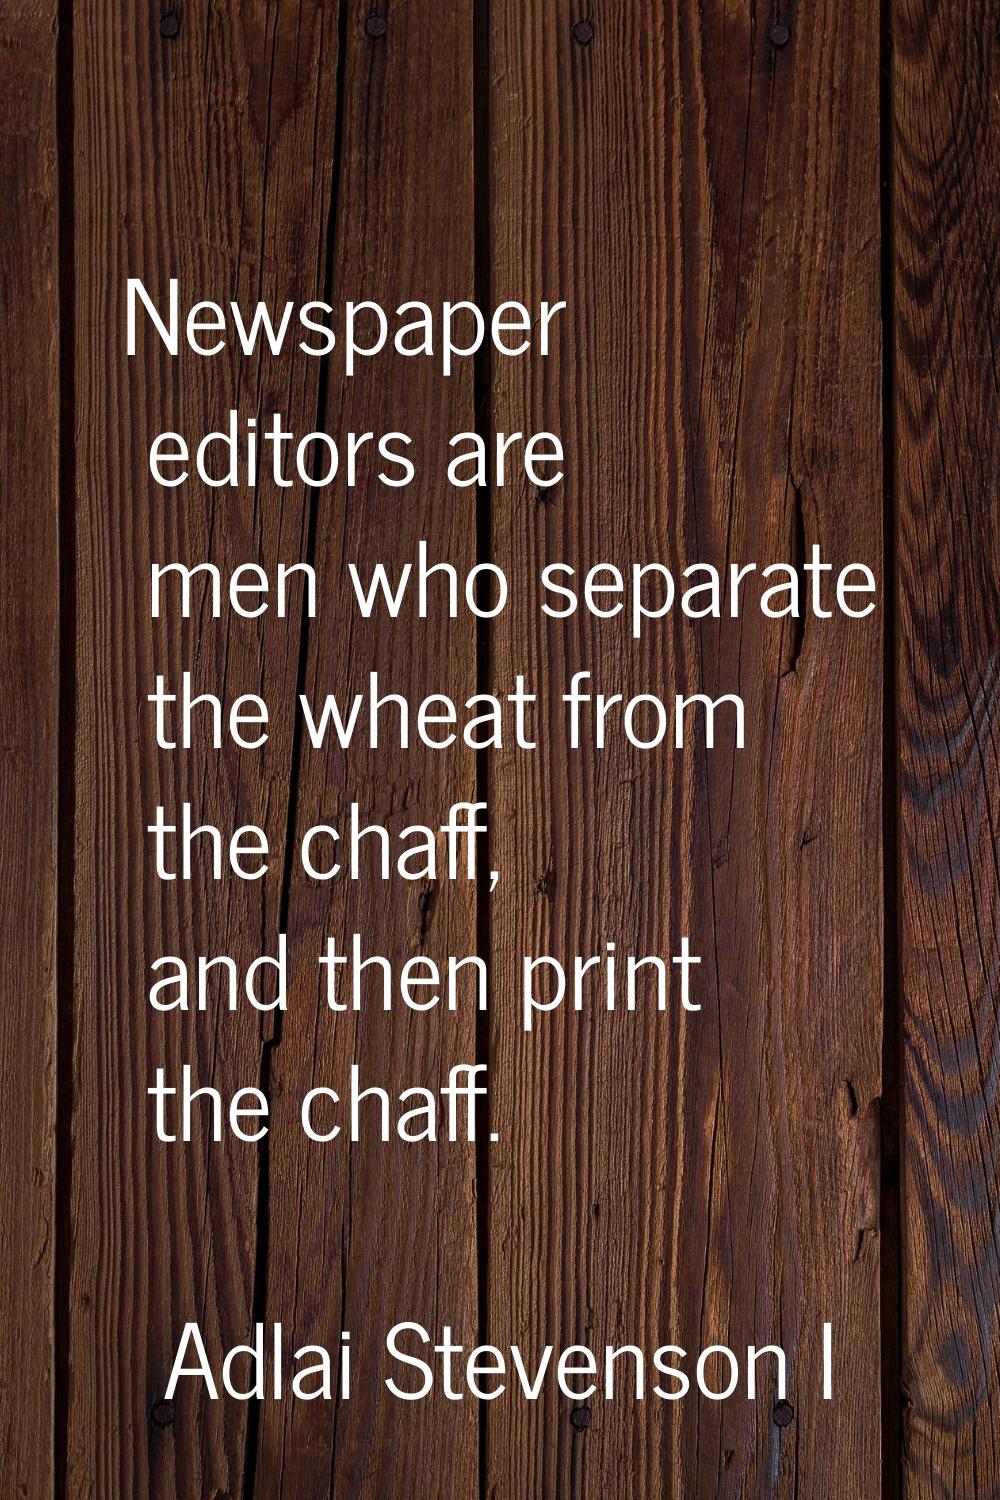 Newspaper editors are men who separate the wheat from the chaff, and then print the chaff.